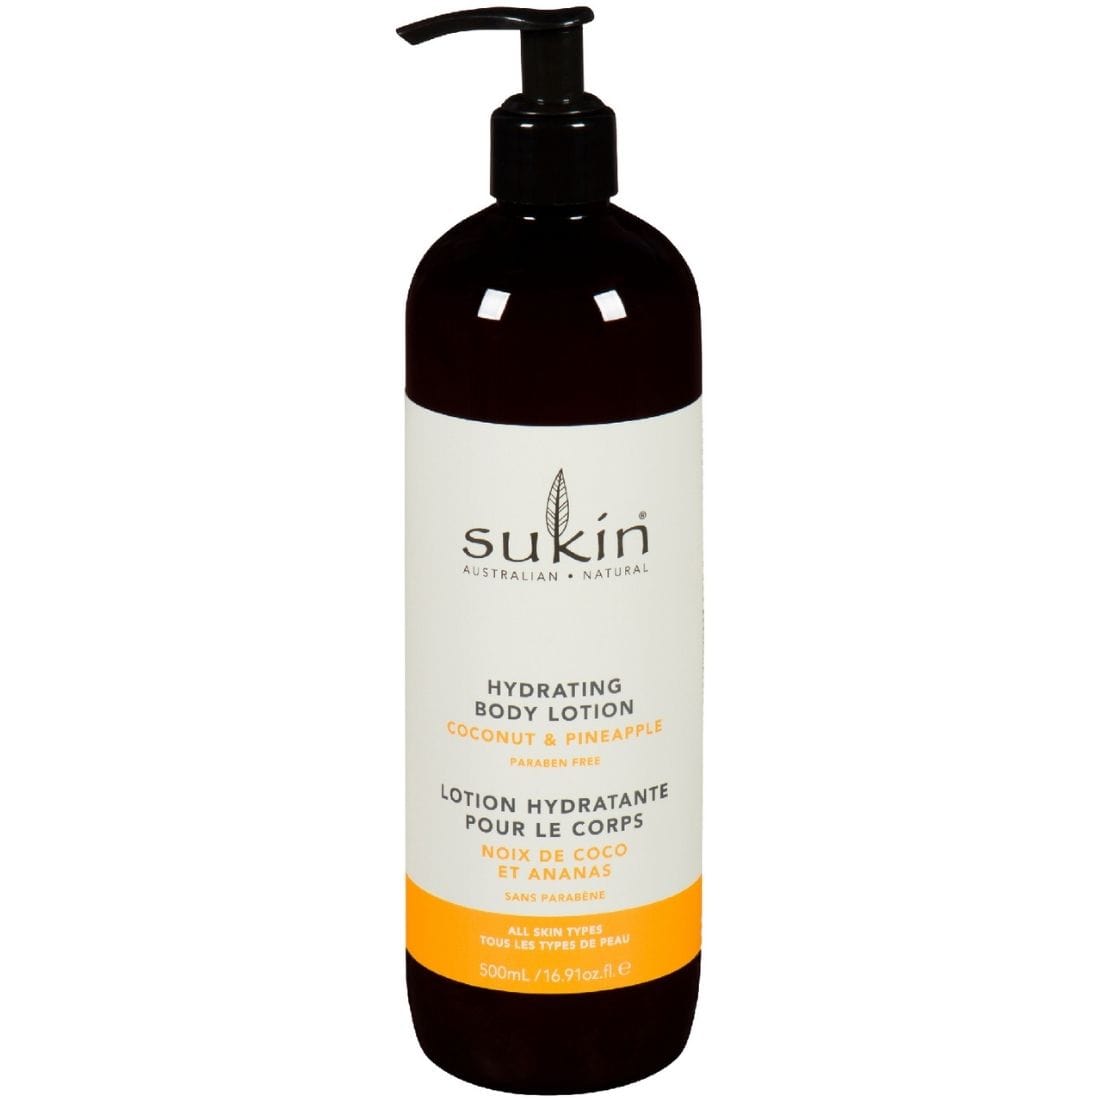 Sukin Hydrating Body Lotion, Clearance 40% Off, Final Sale